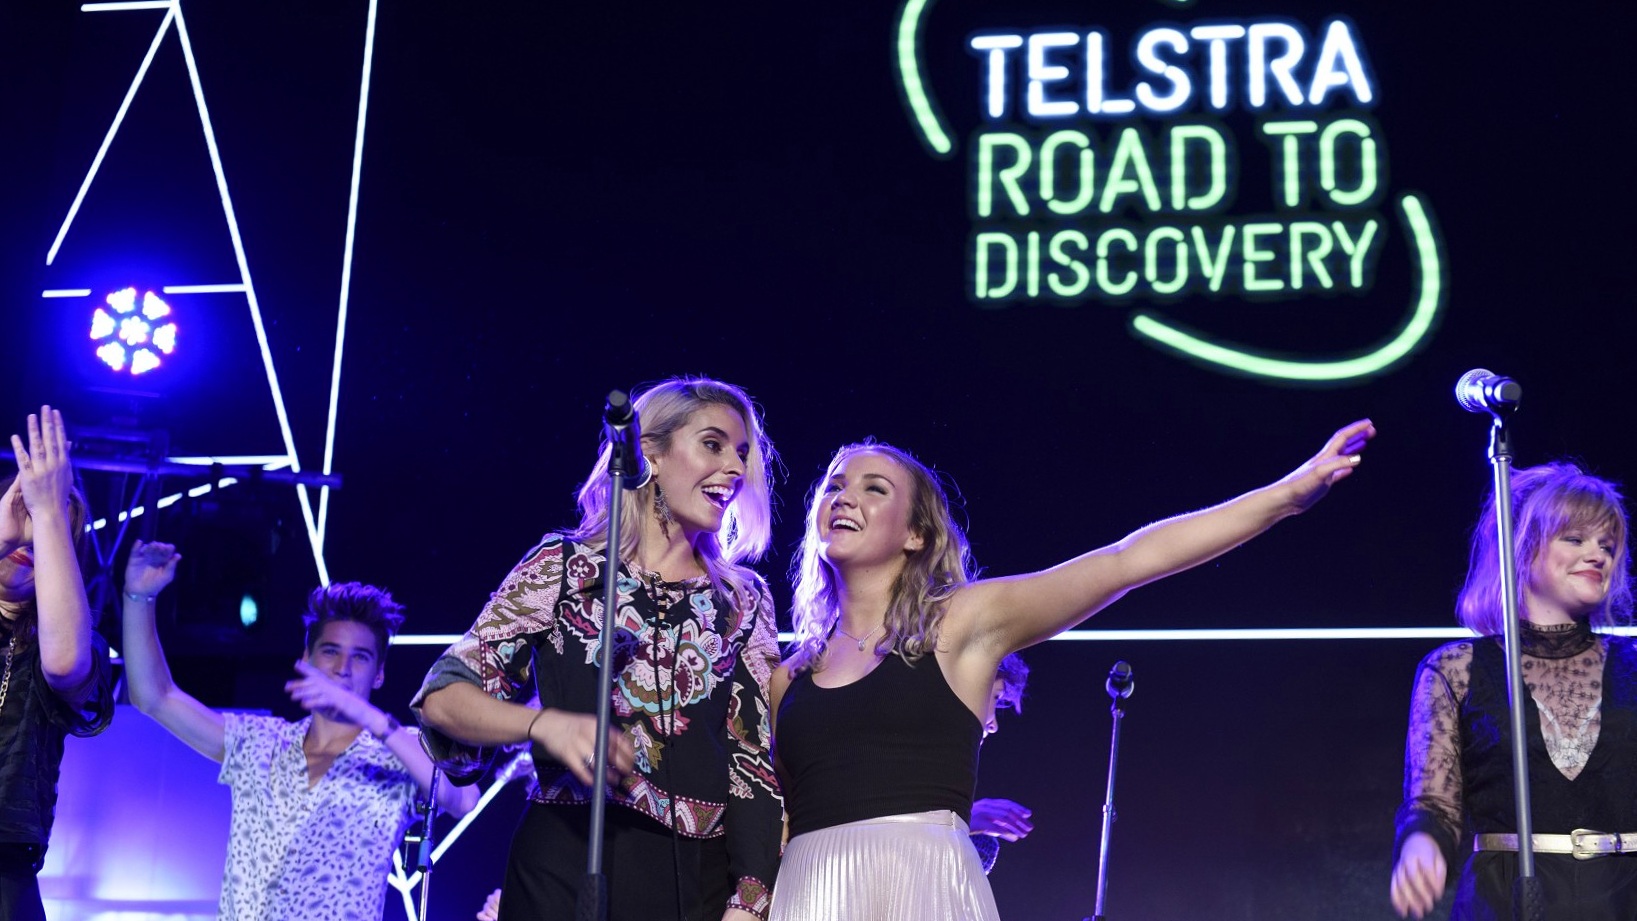 Telstra road to discovery - Grand Final 2015